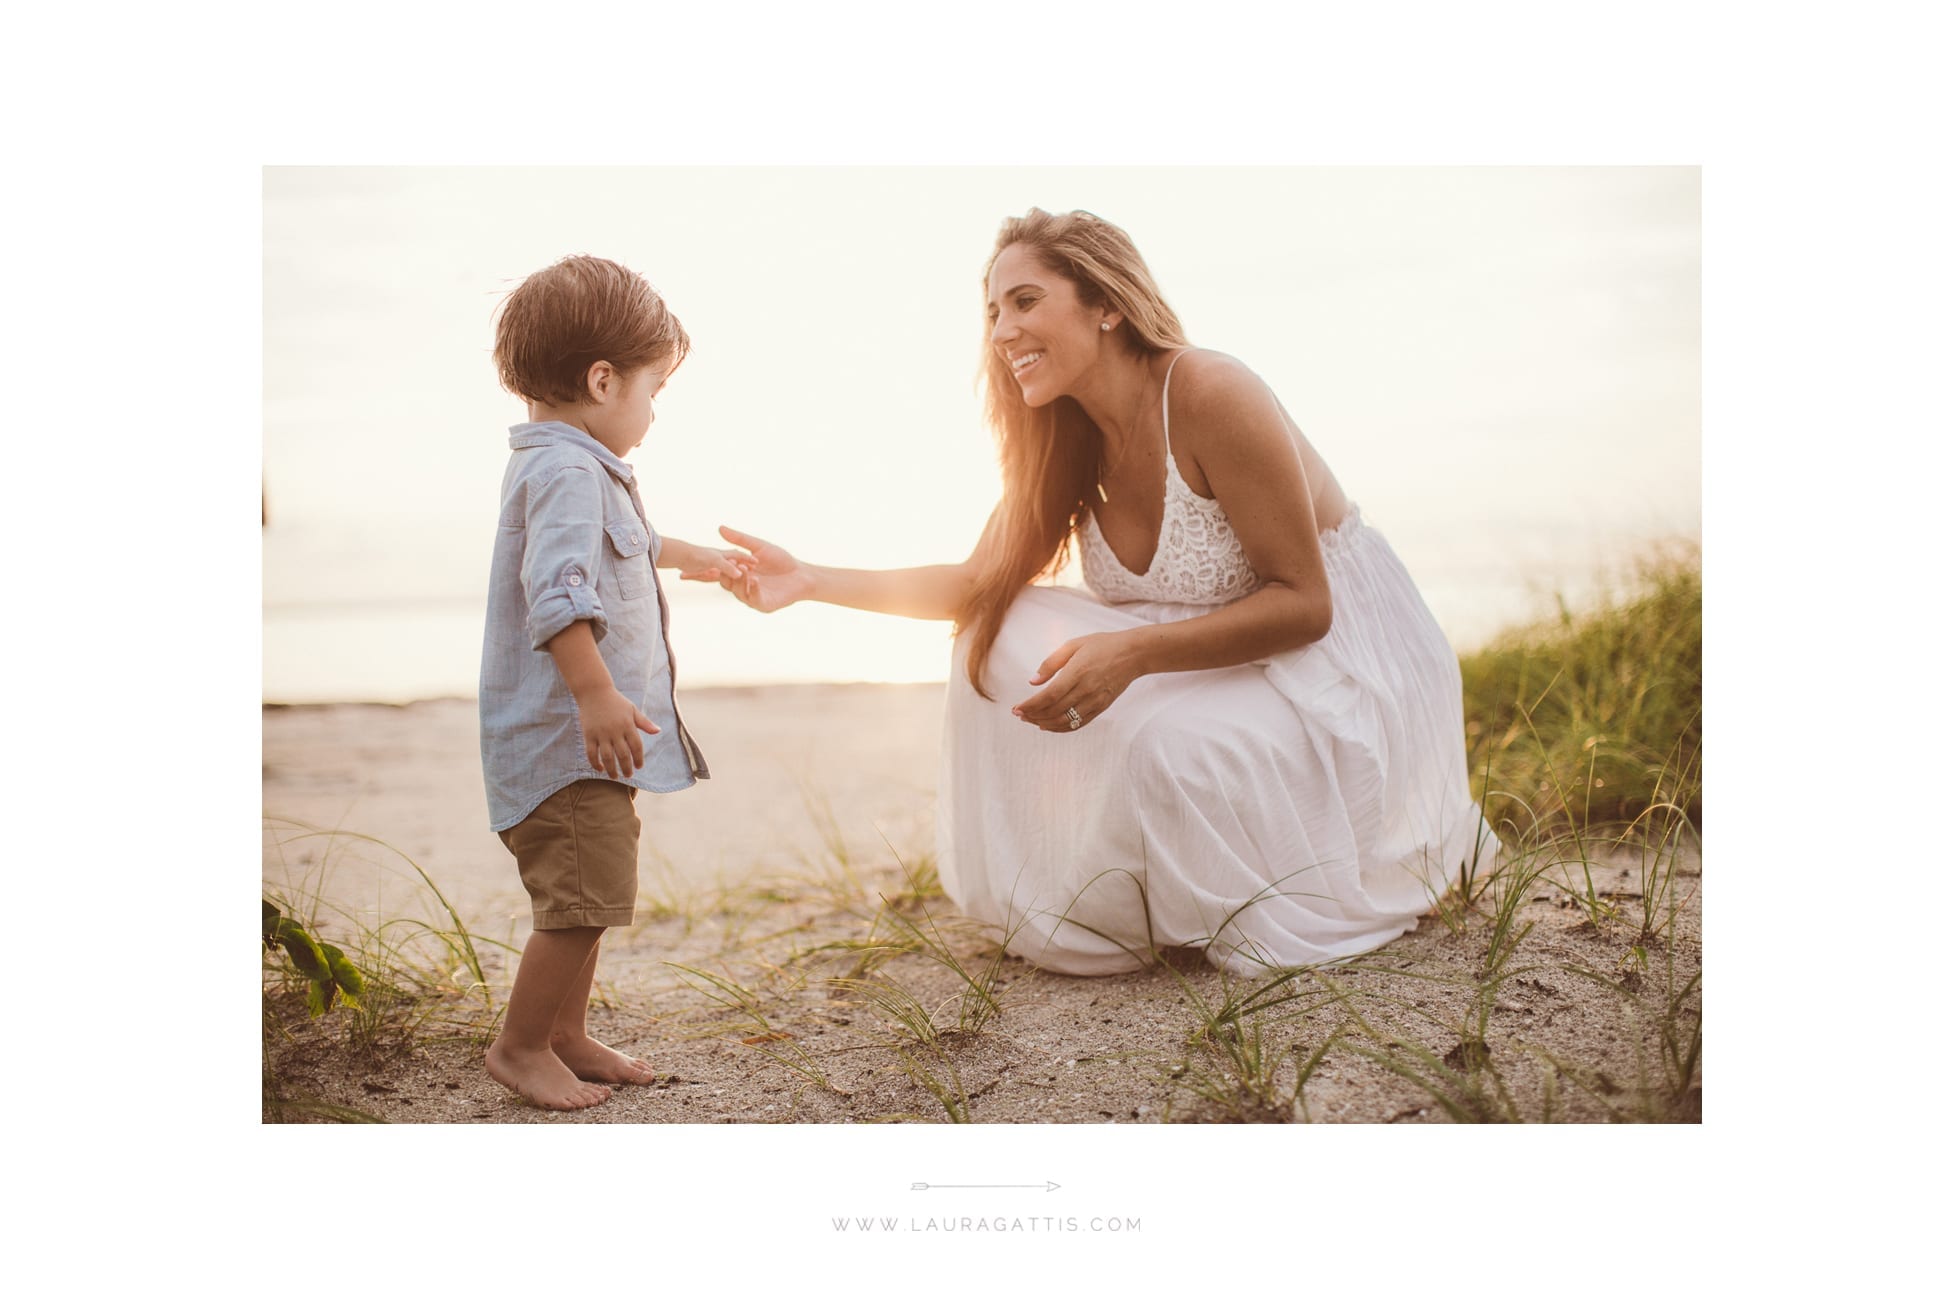 natural light mother and child beach maternity session | laura gattis photography